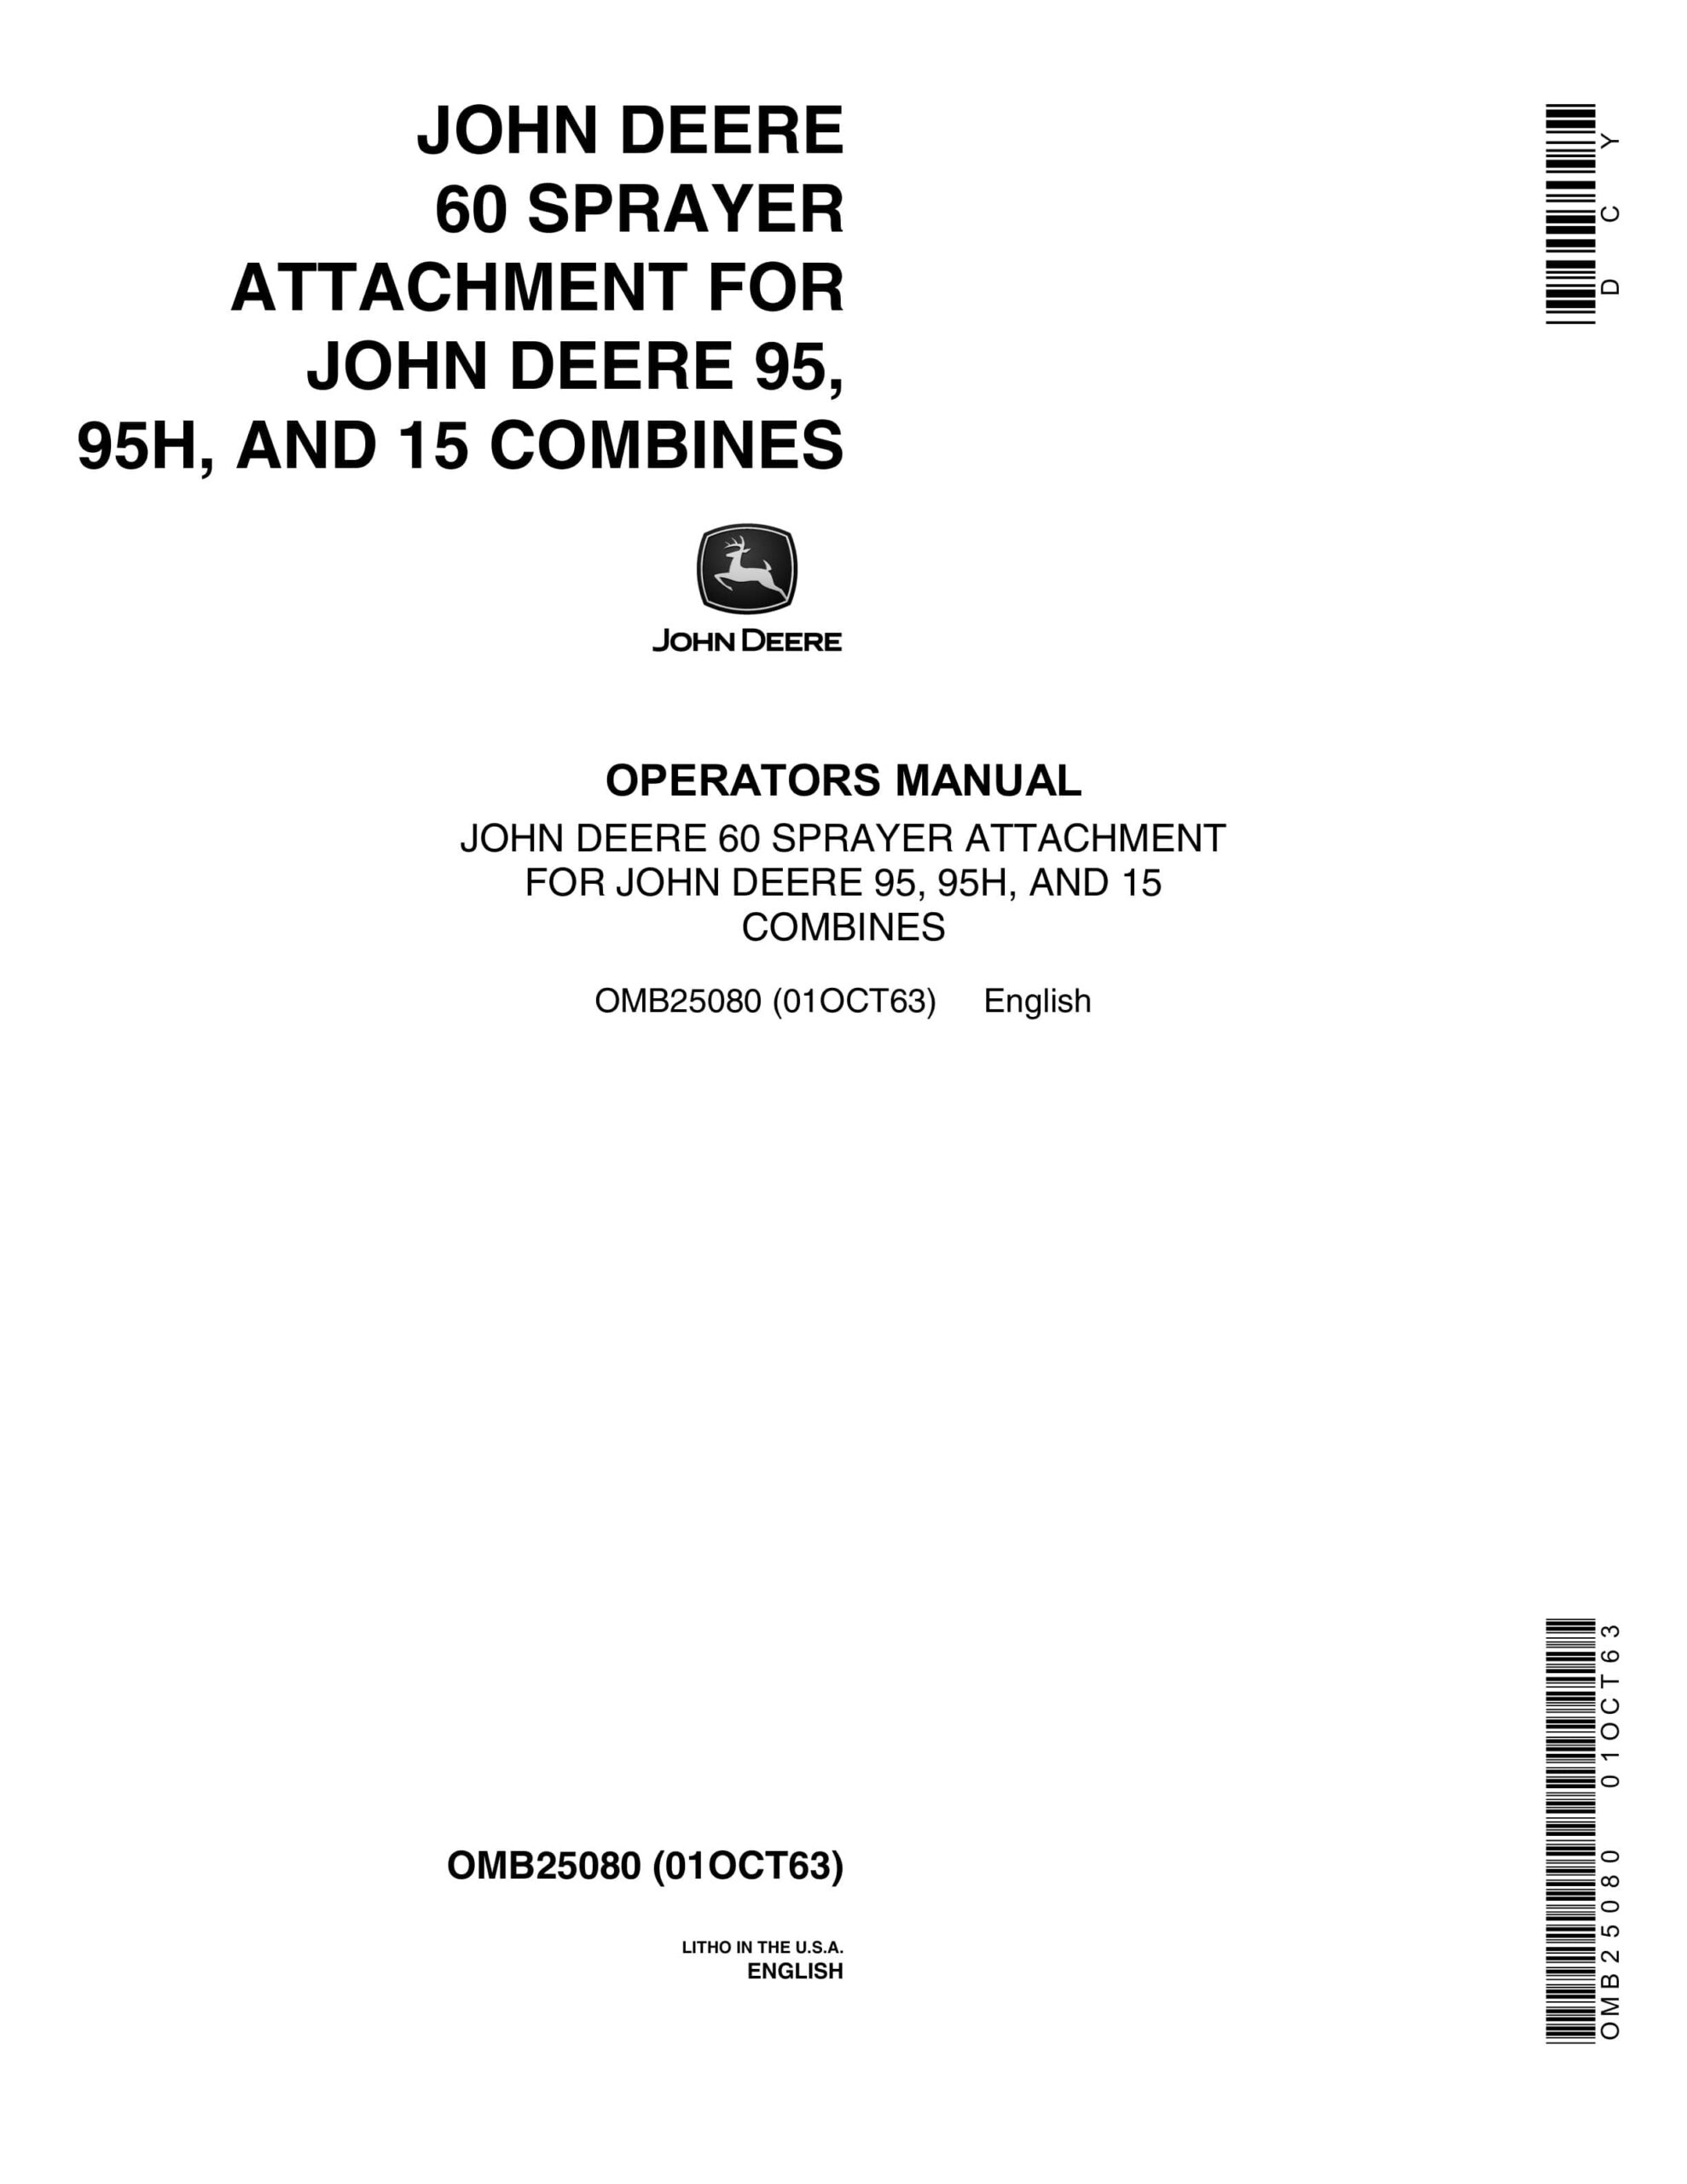 John Deere 60 SPRAYER ATTACHMENT FOR 95, 95H, AND 15 COMBINES Operator Manual OMB25080-1